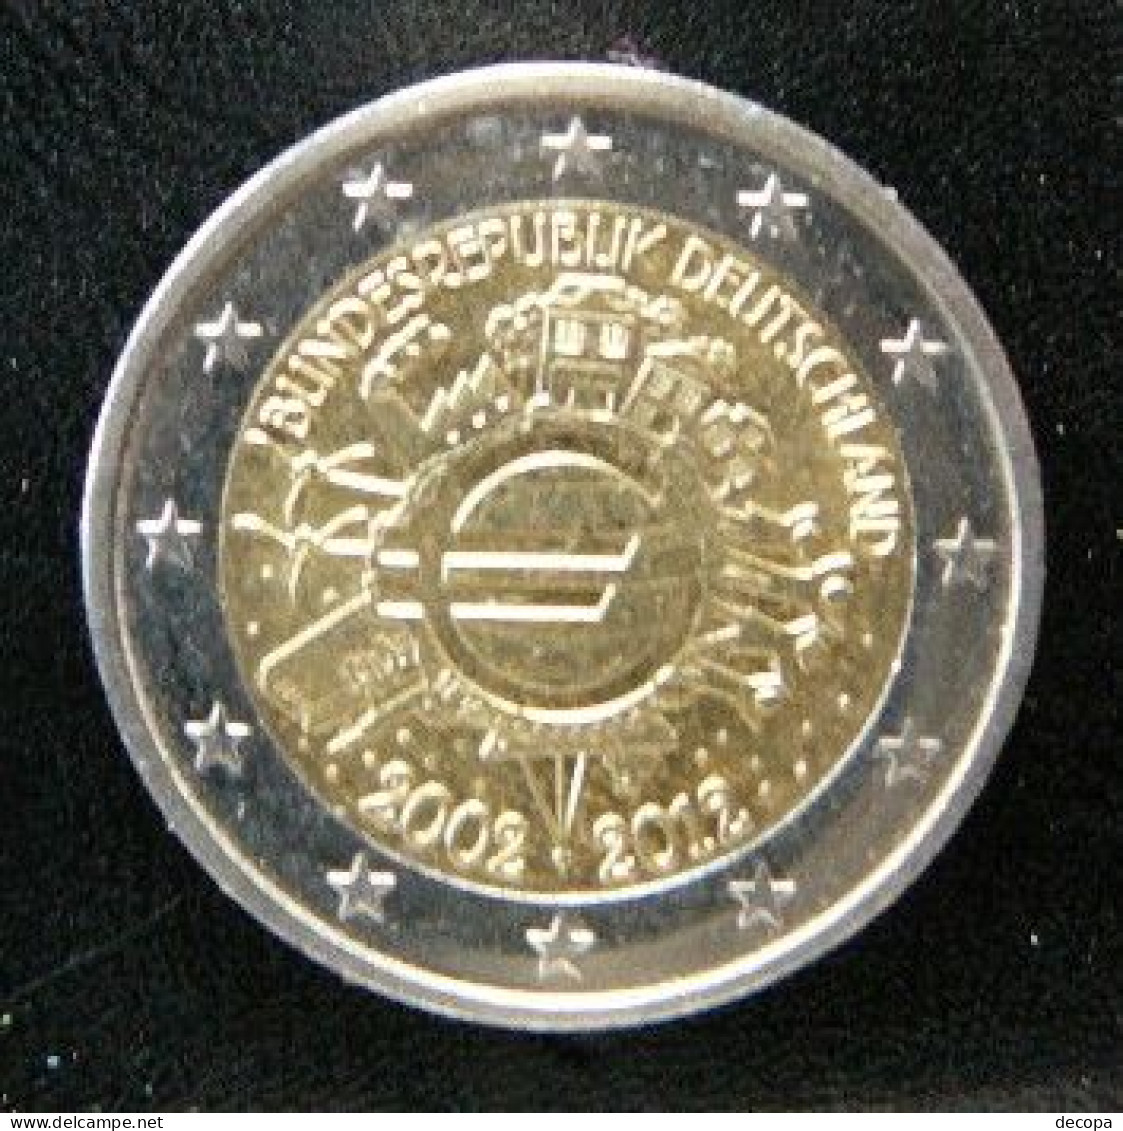 Germany - Allemagne - Duitsland   2 EURO 2012 F   10 Years Euro      Speciale Uitgave - Commemorative - Alemania